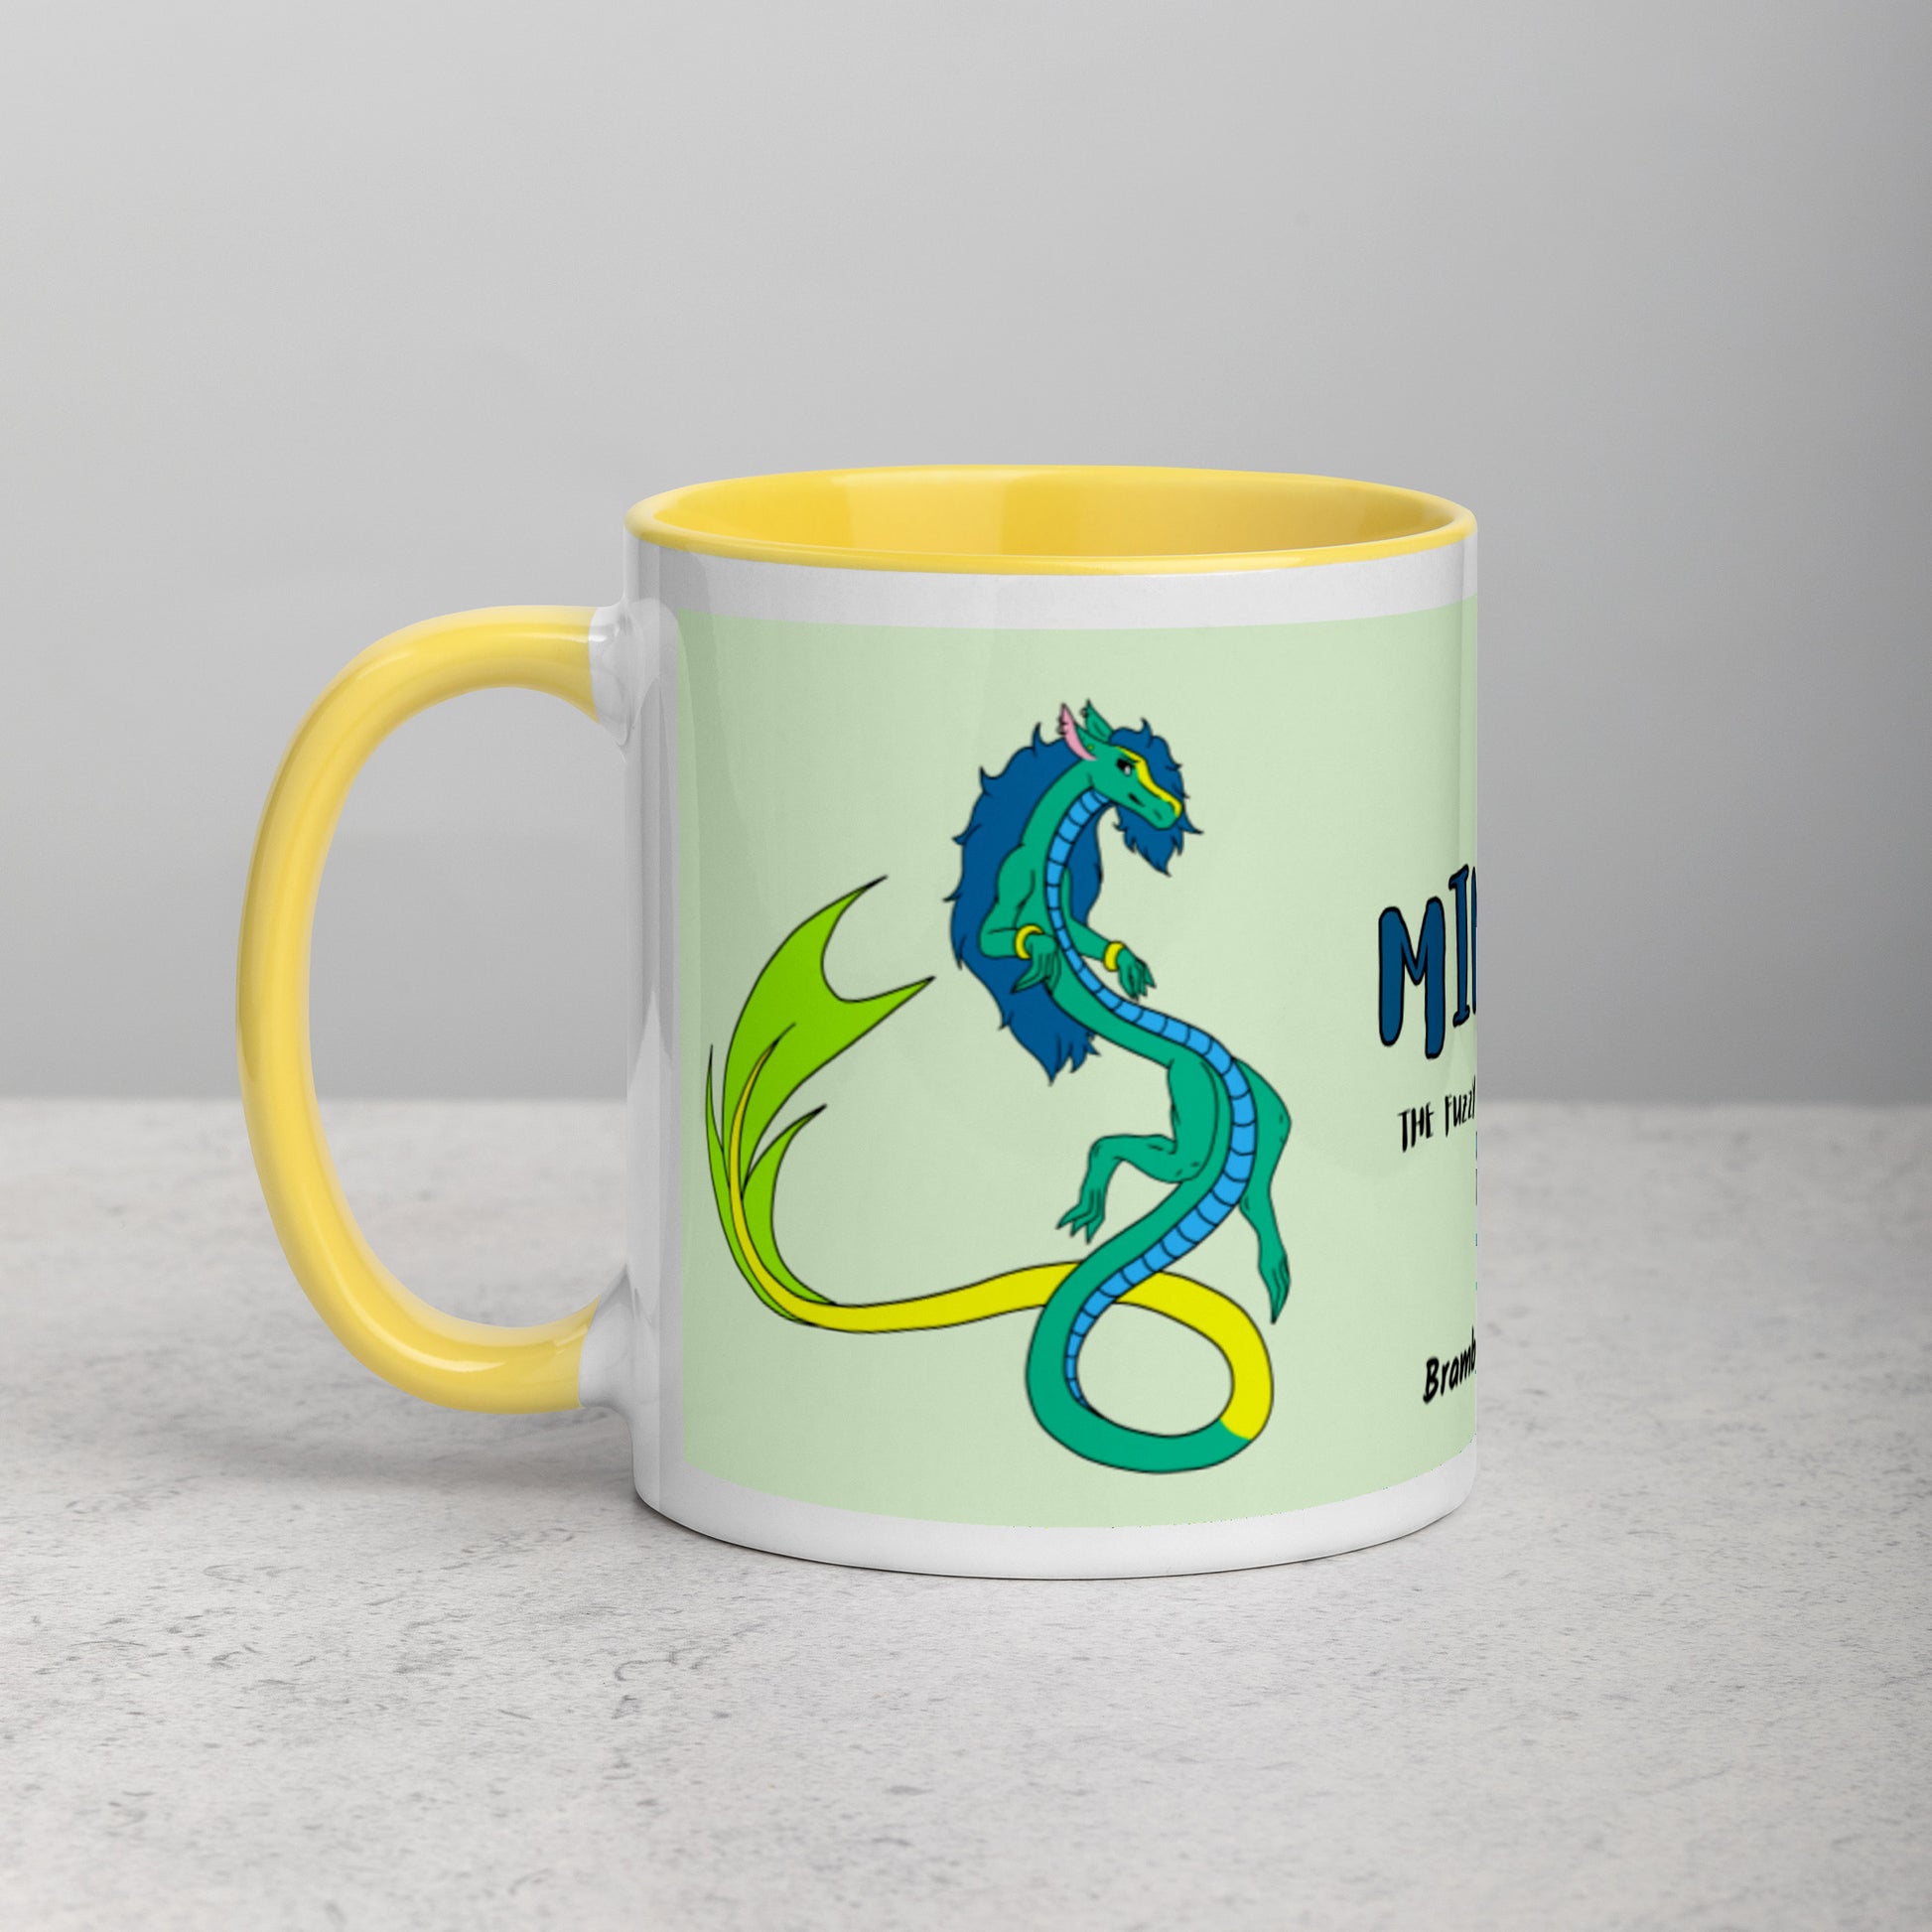 11 ounce white ceramic mug. Yellow inside and handle. Features double-sided image of Mikori the Fuzzy Noodle Dragon. Shown on tabletop.